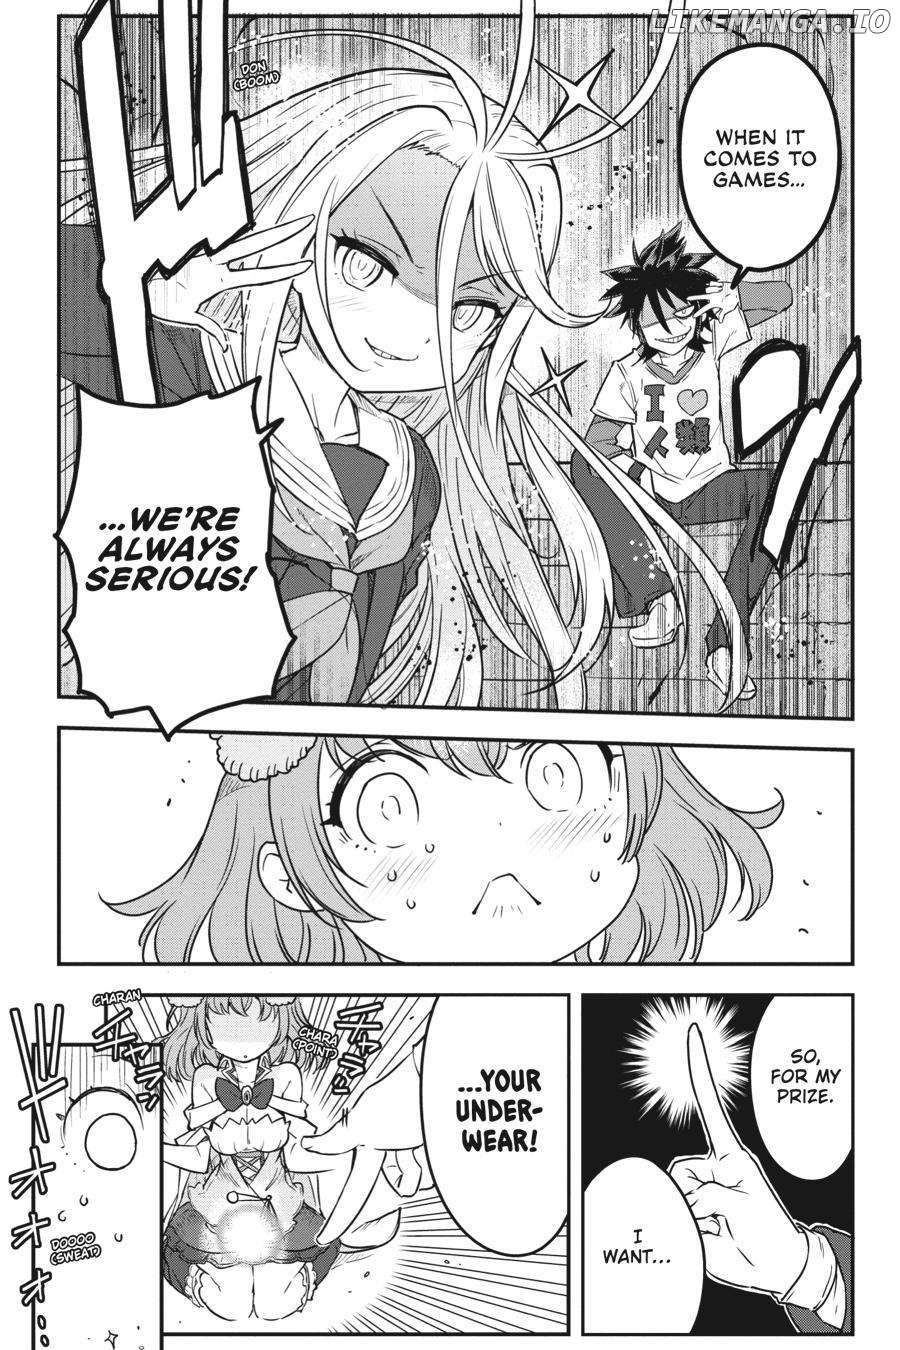 No Game No Life Chapter 2 - Eastern Union Arc Chapter 2 - page 19